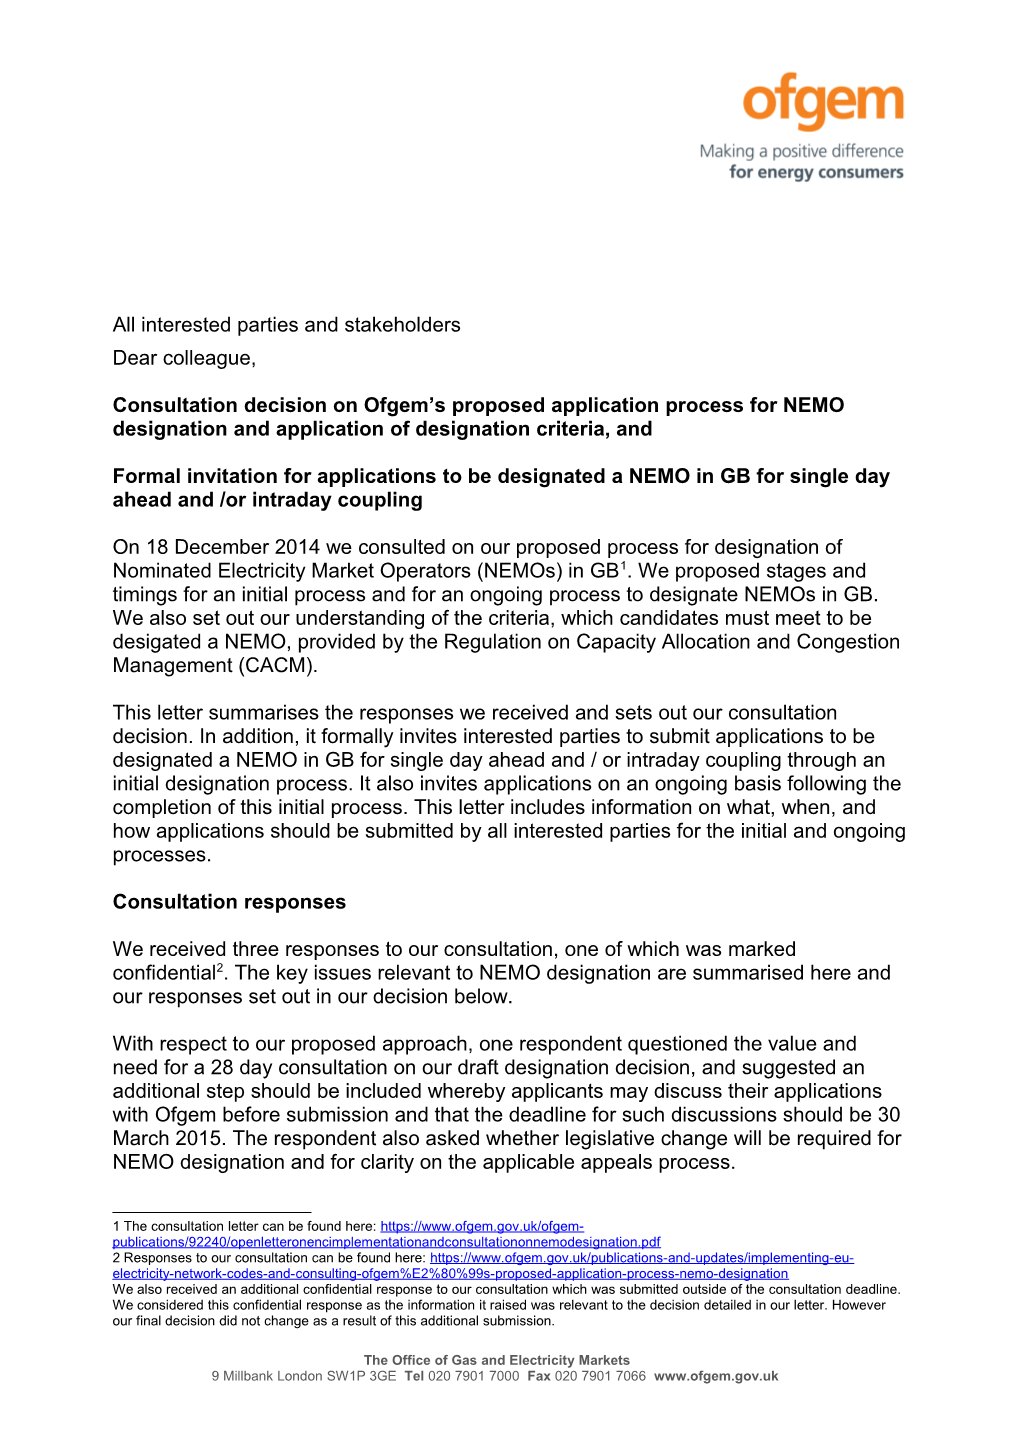 Draft Open Letter on ENC Implementation and Consultation on NEMO Designation